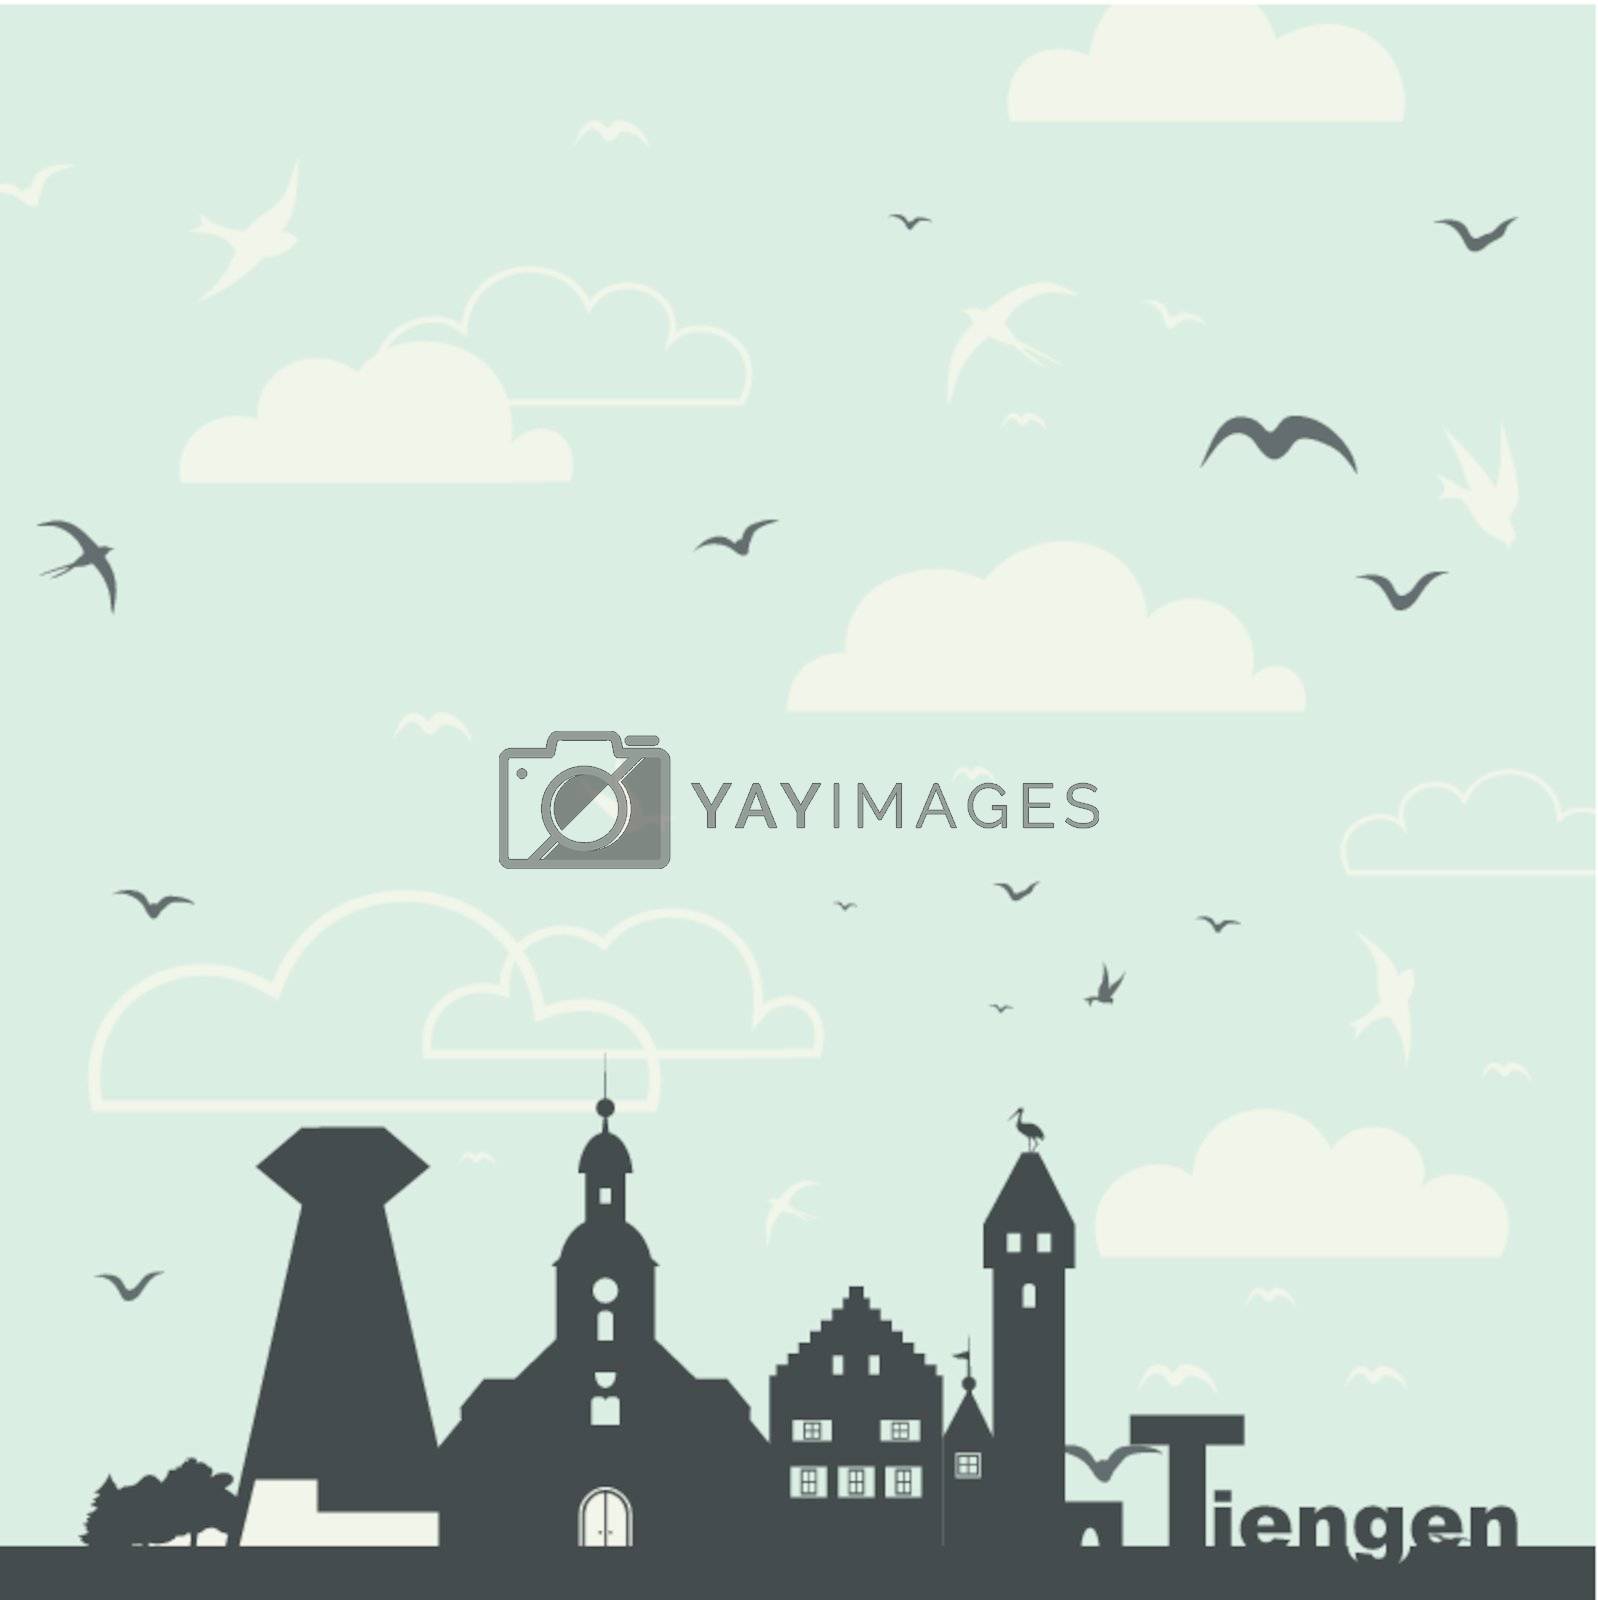 Royalty free image of Birds over a city by aleksander1